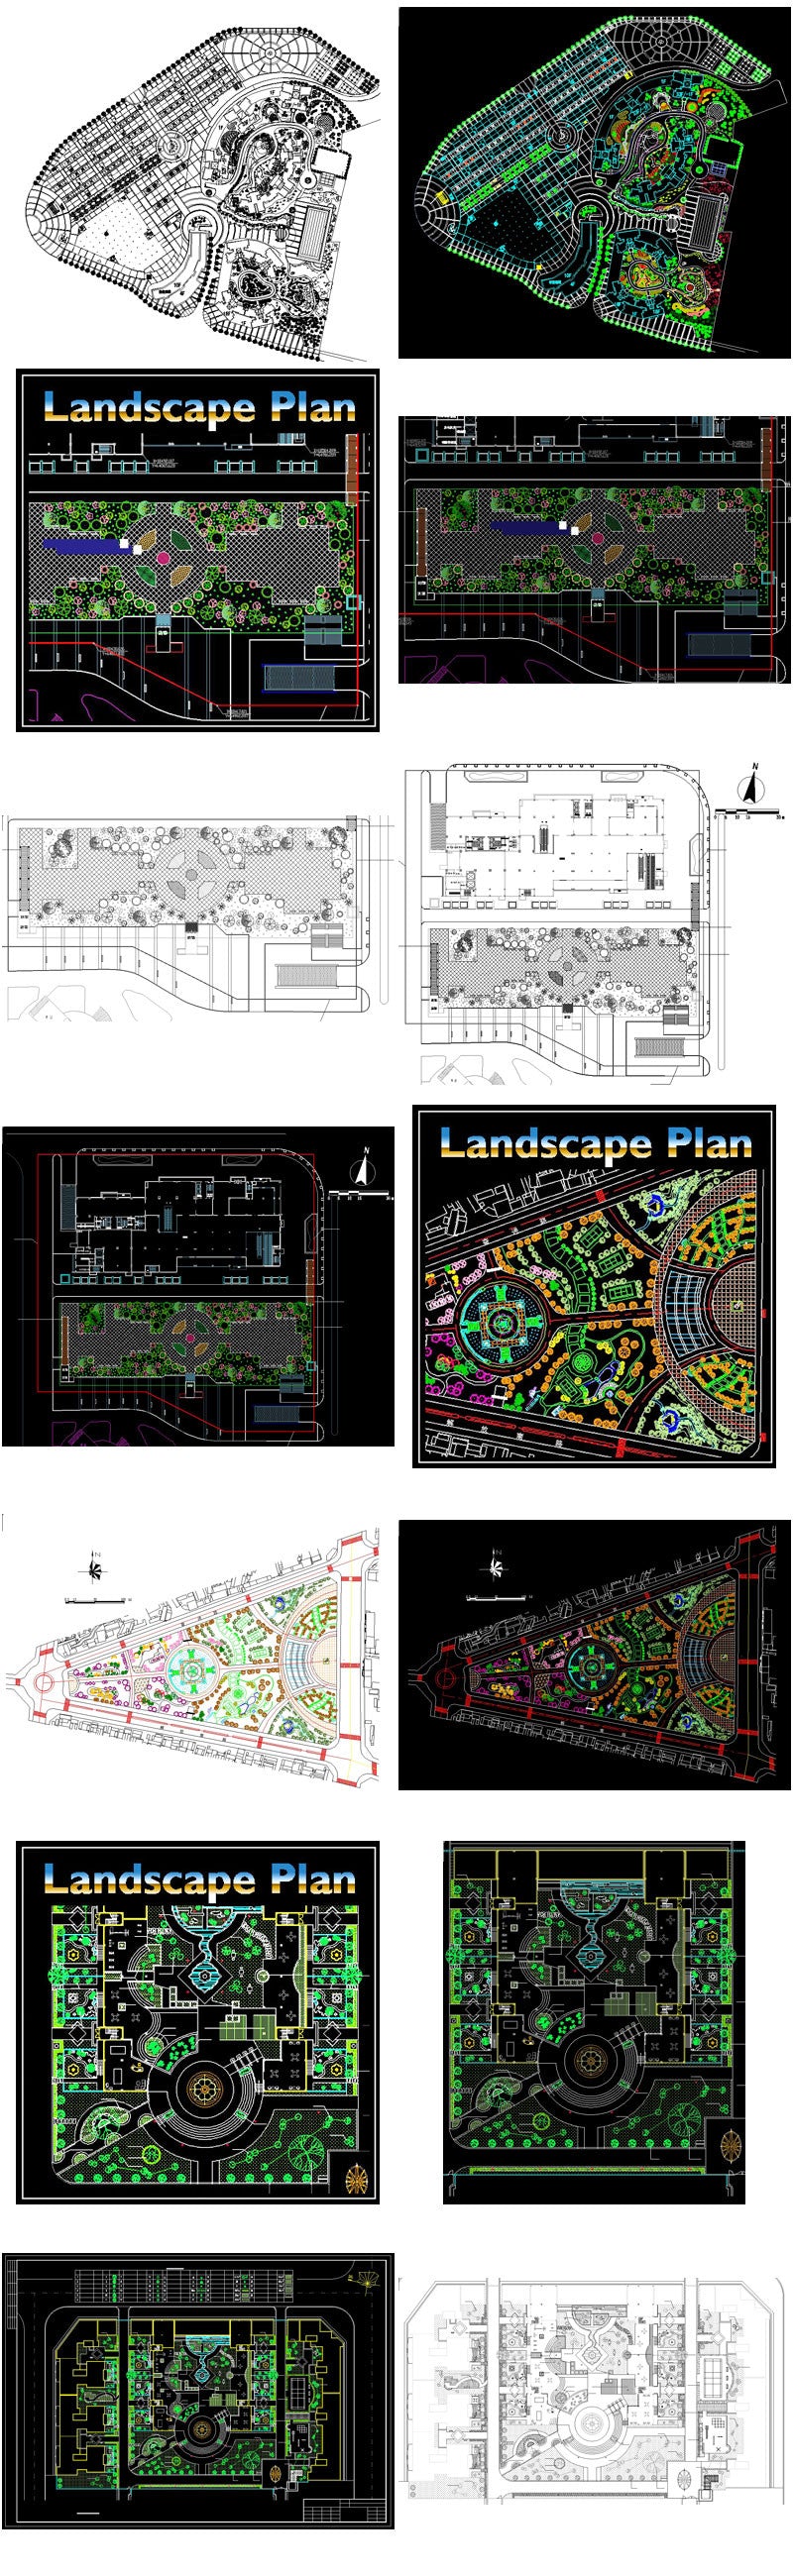 【All Urban Design CAD Drawings Collections】(Best Recommanded!!)